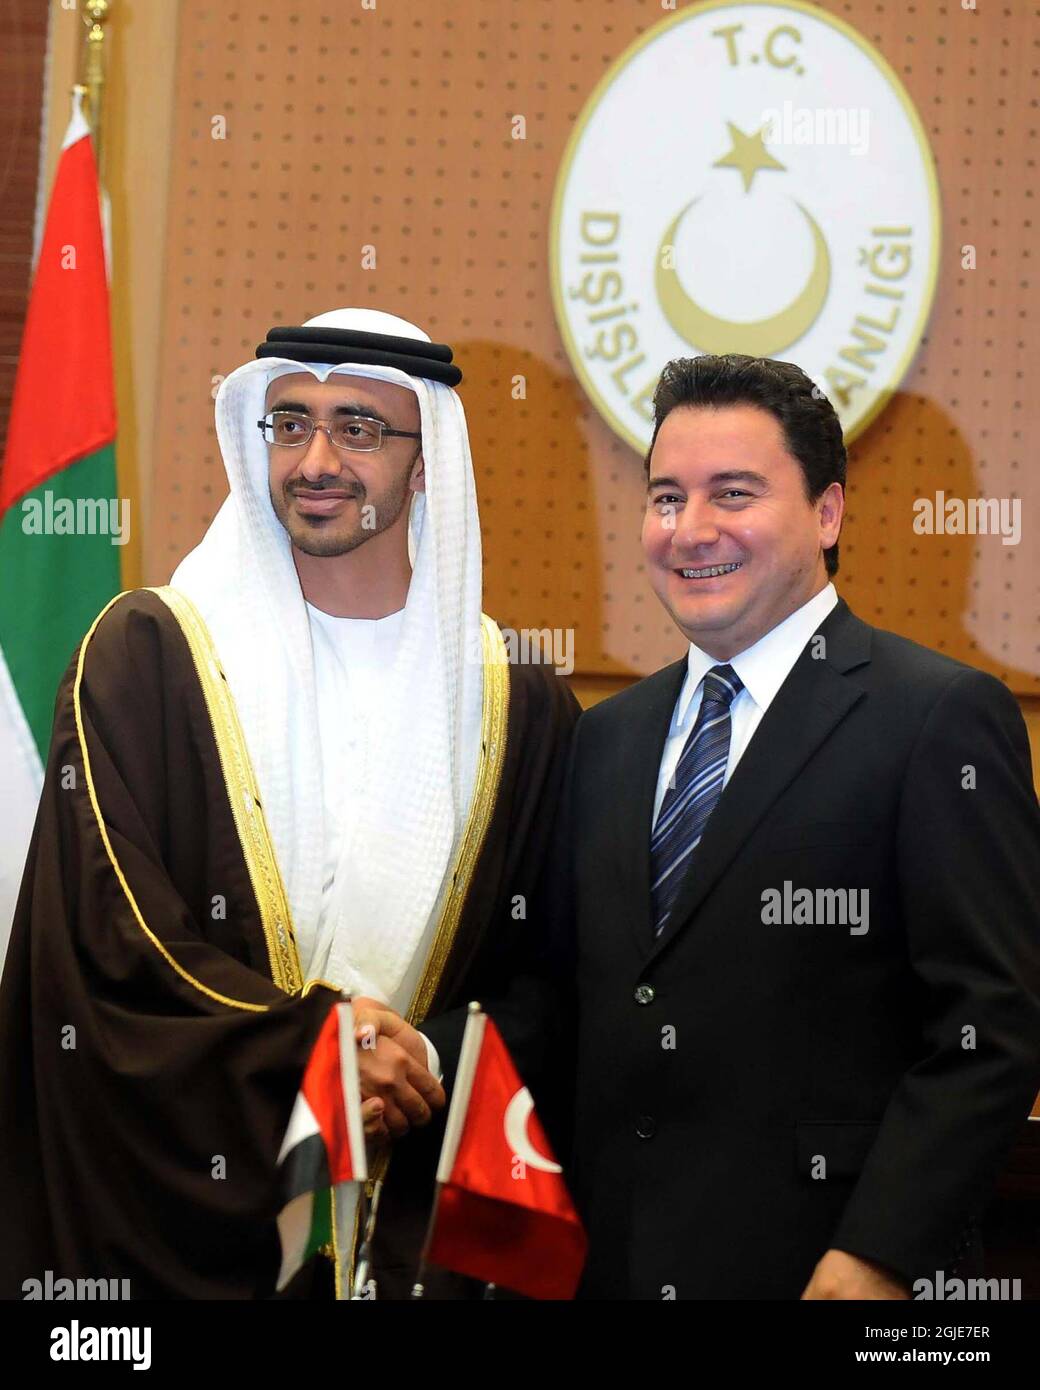 Turkish Foreign Minister Ali BABACAN (R) and UAE Foreign Minister Sheikh Abdullah bin Zayed al-Nahyan pose prior to a meeting in Ankara. Zayed al-Nahyan is in the Turkish capital for talks with top officials including President Abdullah Gul and Prime Minister Tayyip Erdogan. Stock Photo